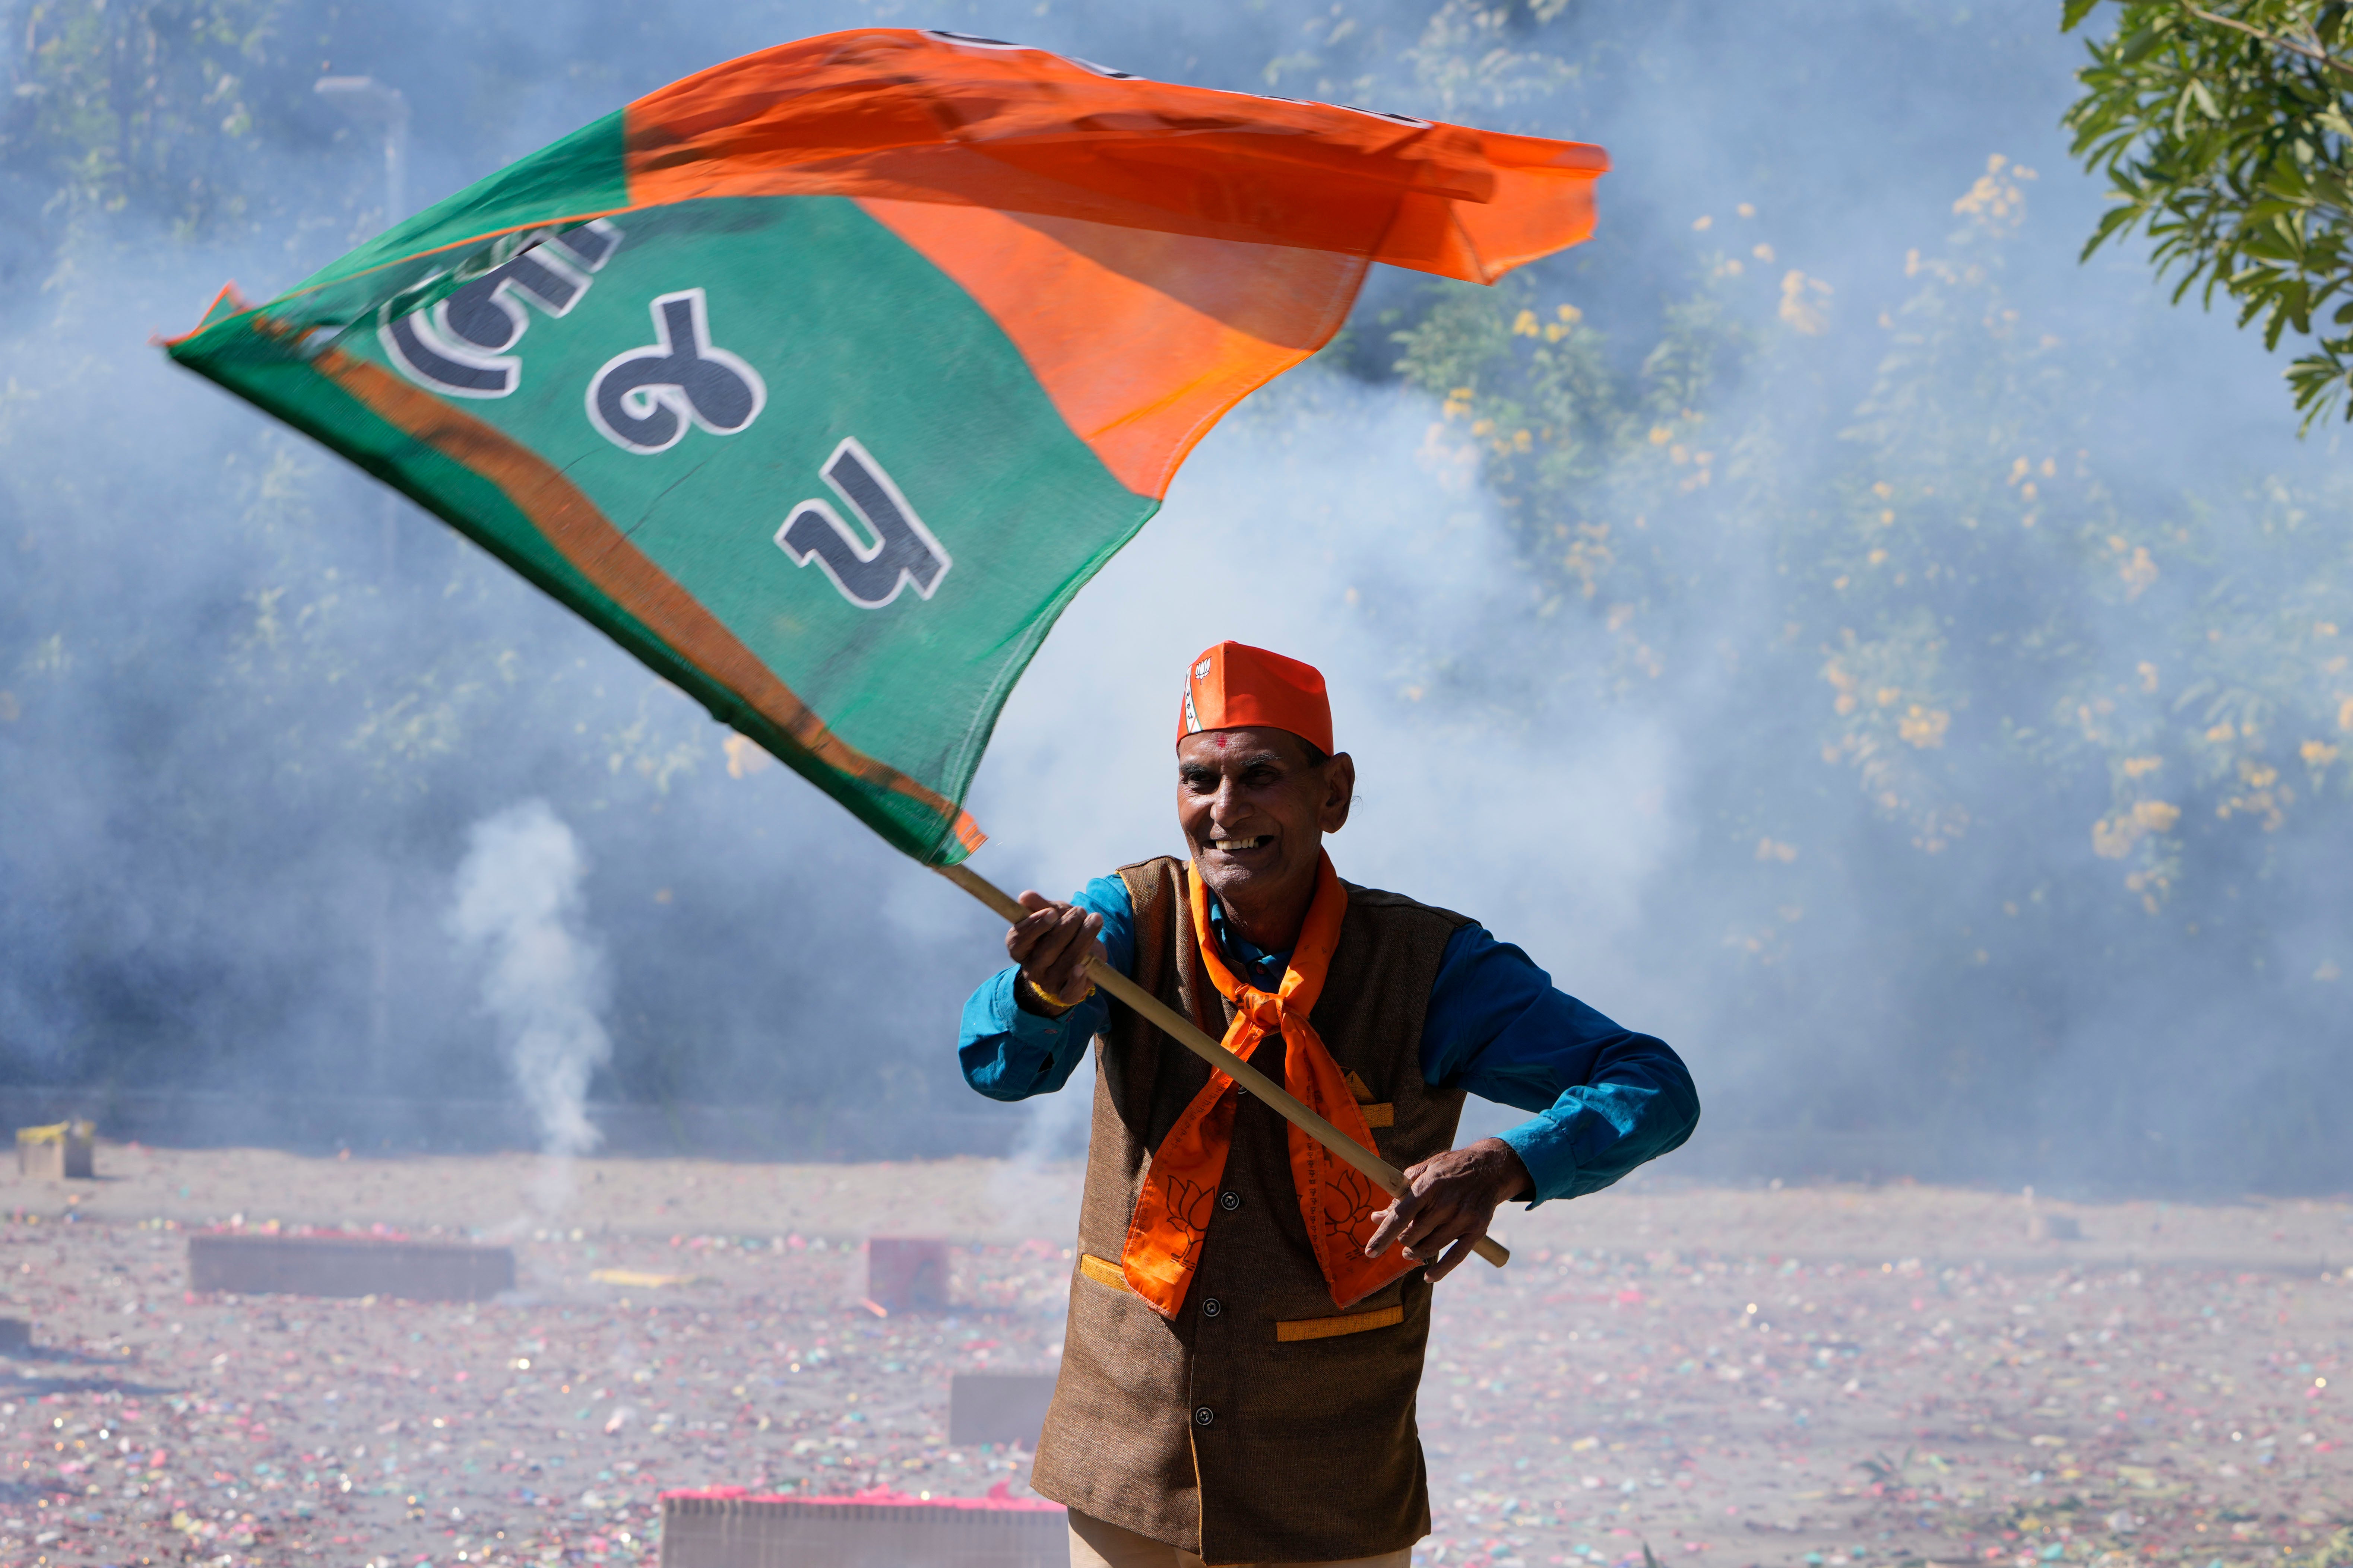 A Bharatiya Janata party (BJP) supporter celebrates lead for the party in Gujarat state elections in Gandhinagar on 8 December 2022